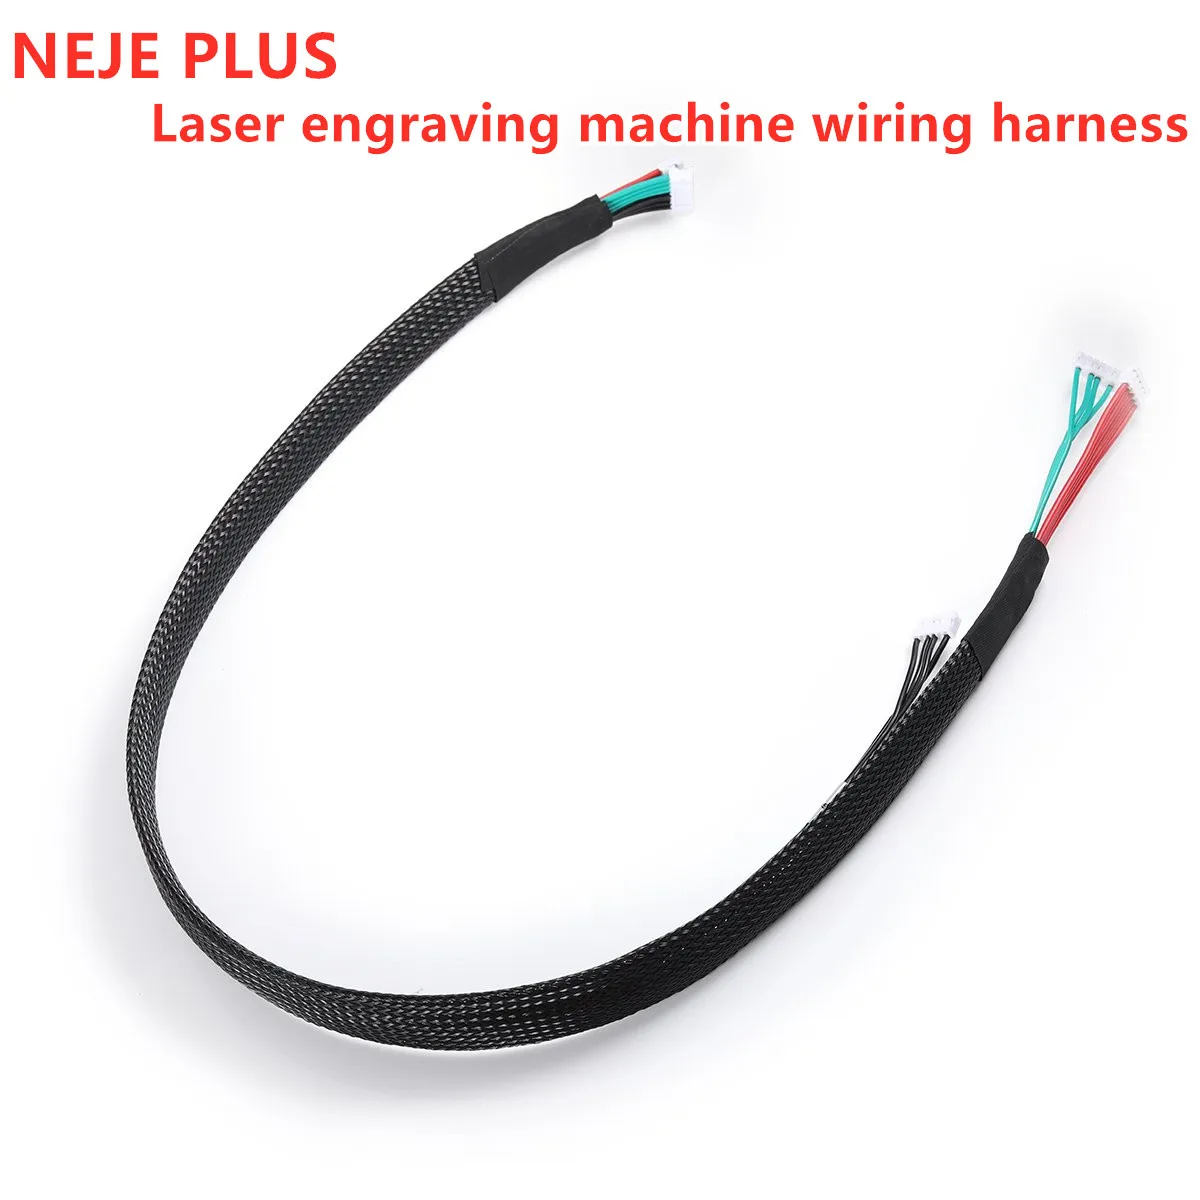 

NEJE PLUS laser engraving machine wiring harness, power cord, data cable